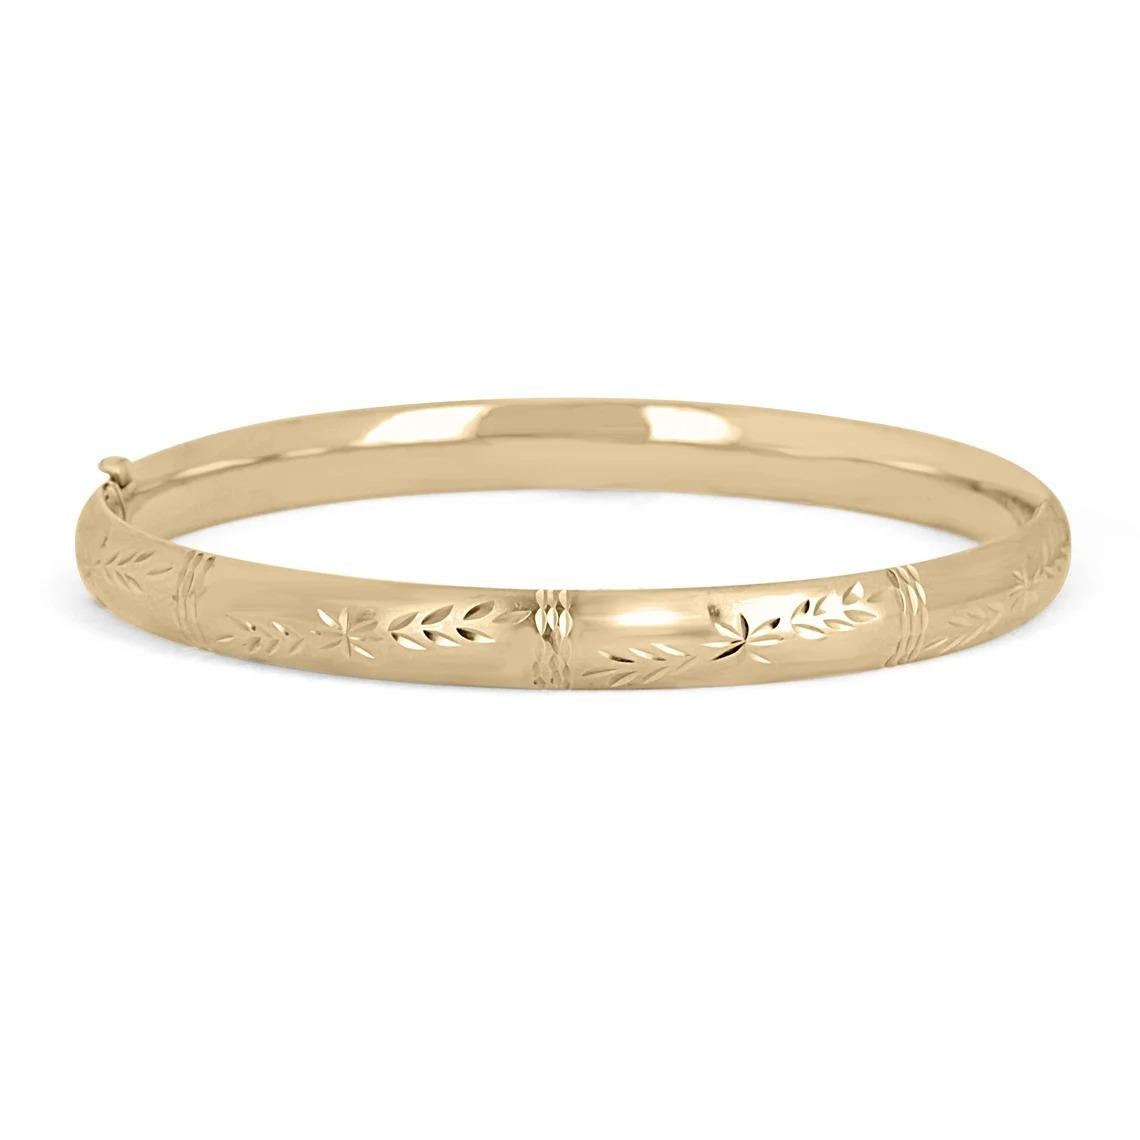 A 14K yellow gold, florentine dome classic comfort fit bangle bracelet. Weighing 9.1 grams in gold, and fits a x wrist.

Bracelet Style: Bangle
Metal Purity: 14K Yellow Gold
Gold Weight: 9.1 Grams
Wrist Circumference: -Inches
Width: 6.15